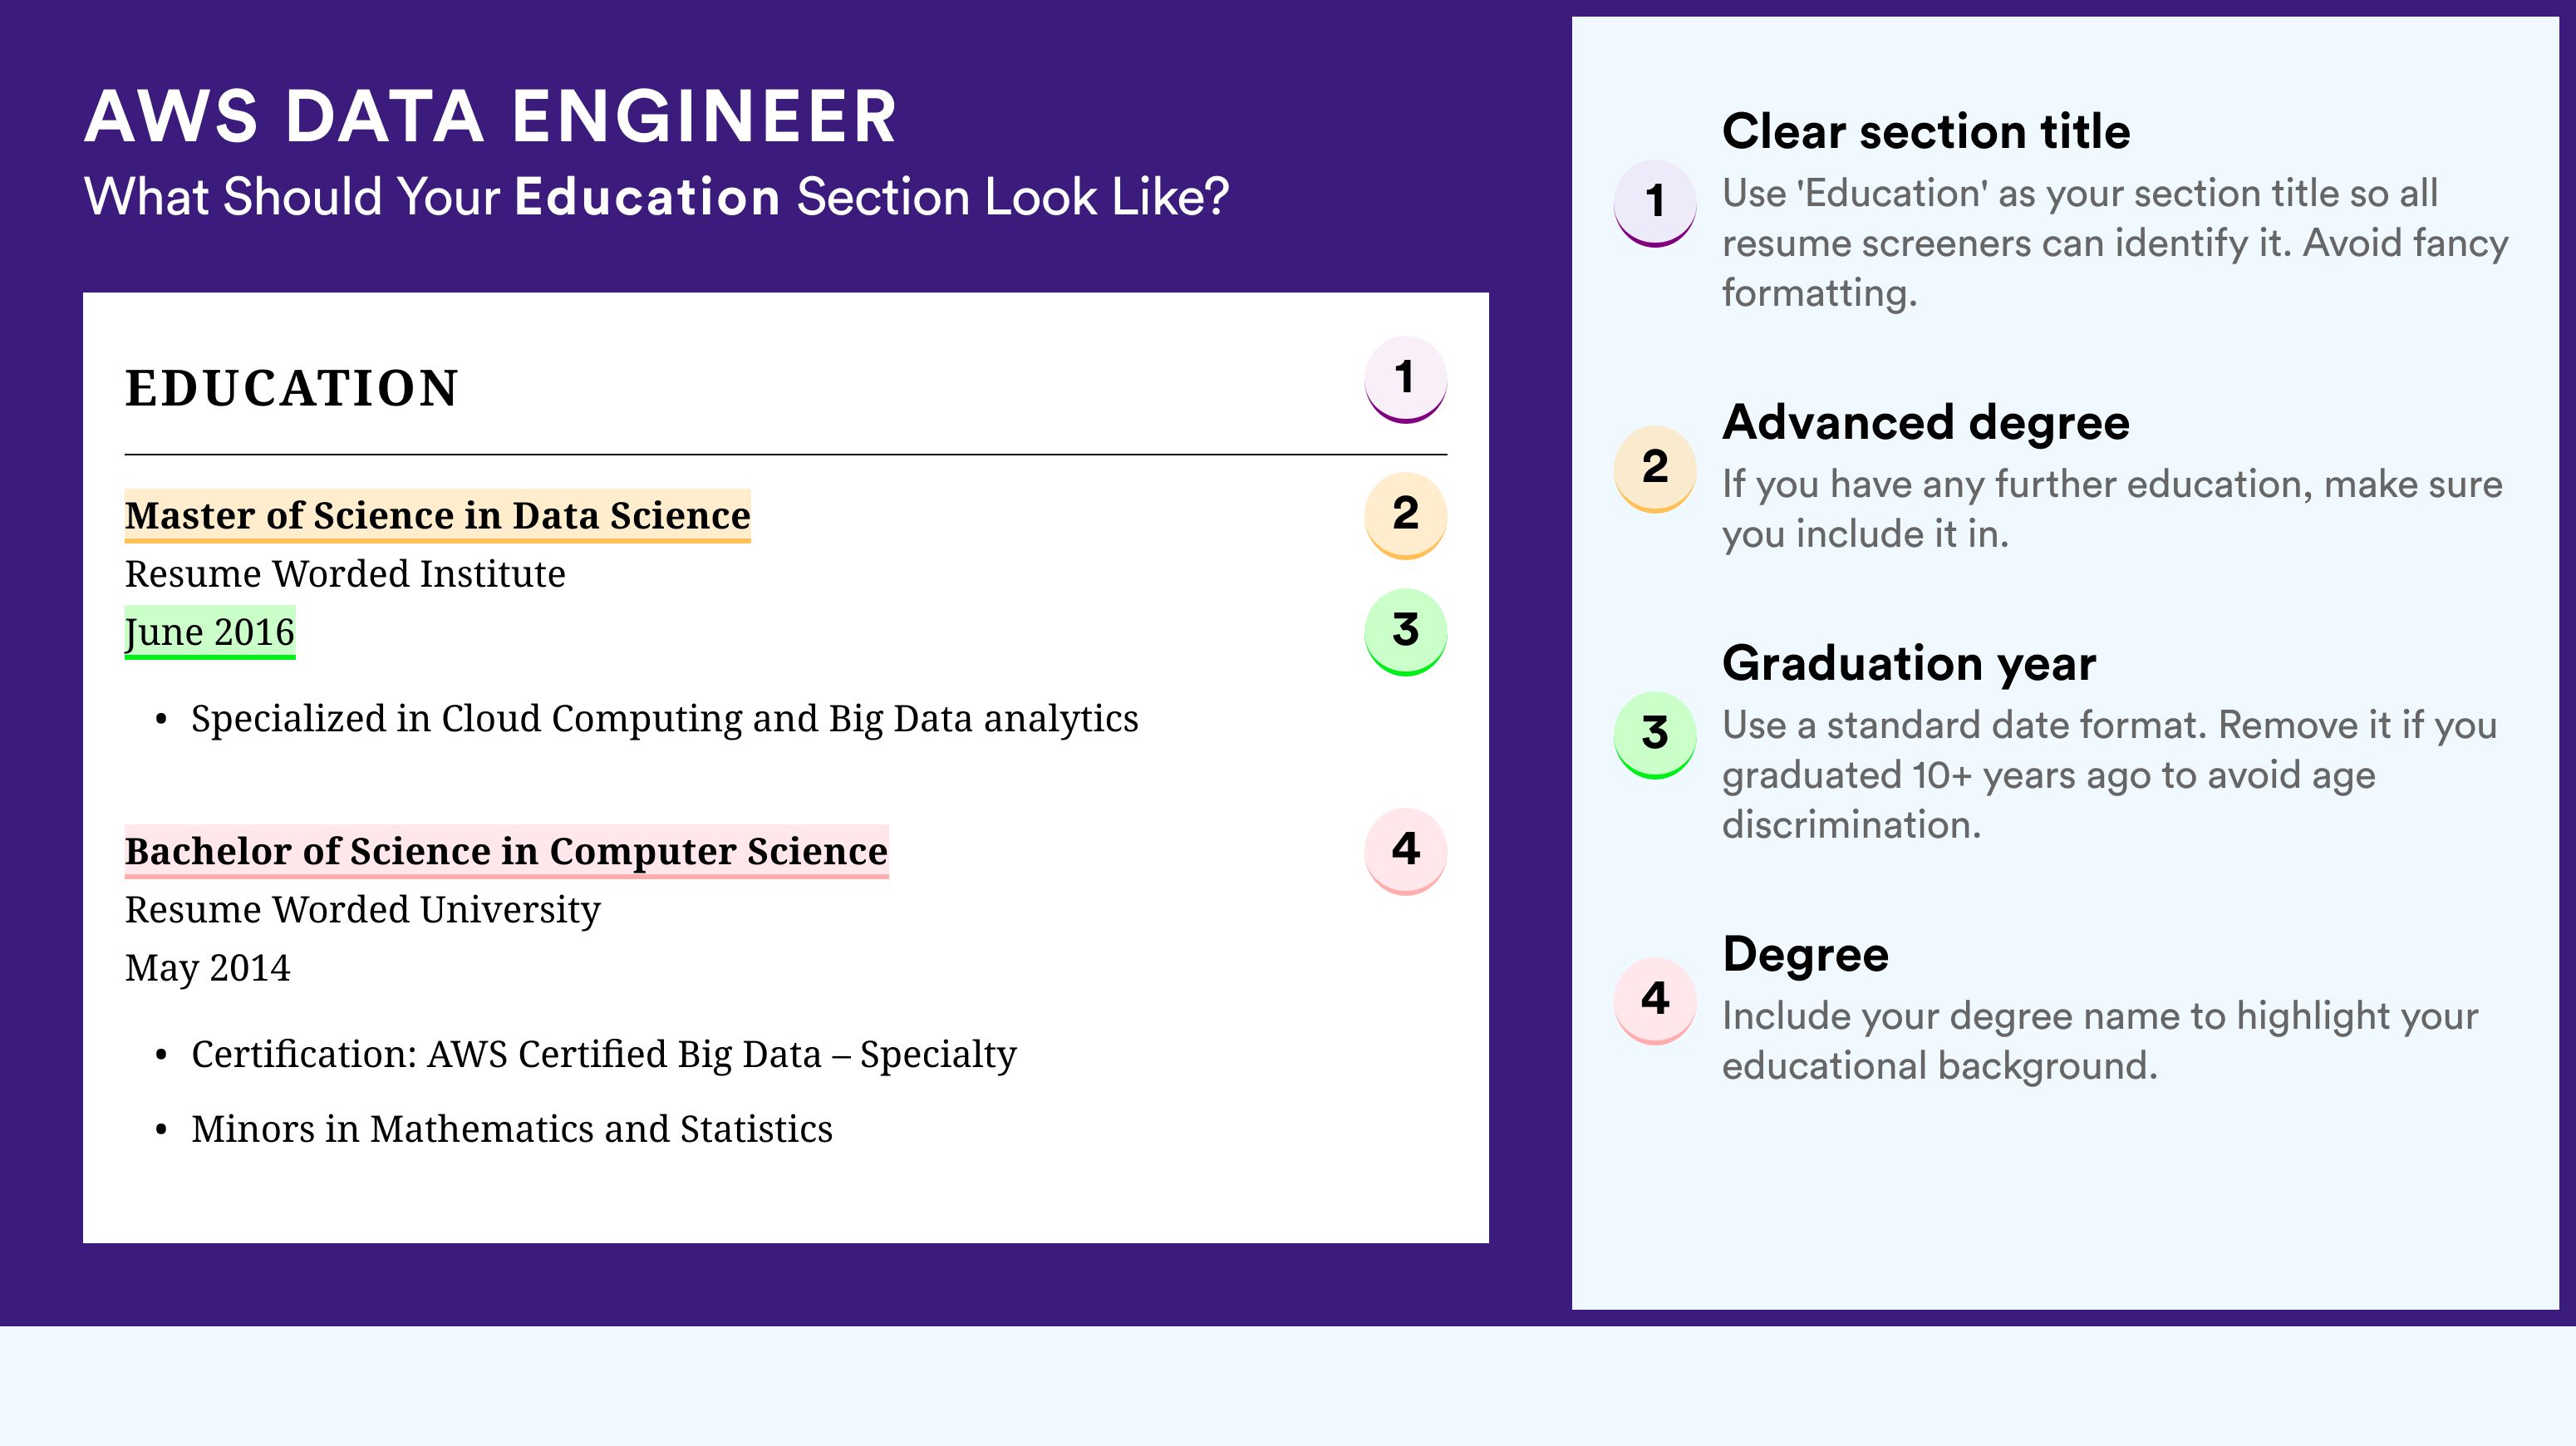 How To Write An Education Section - AWS Data Engineer Roles